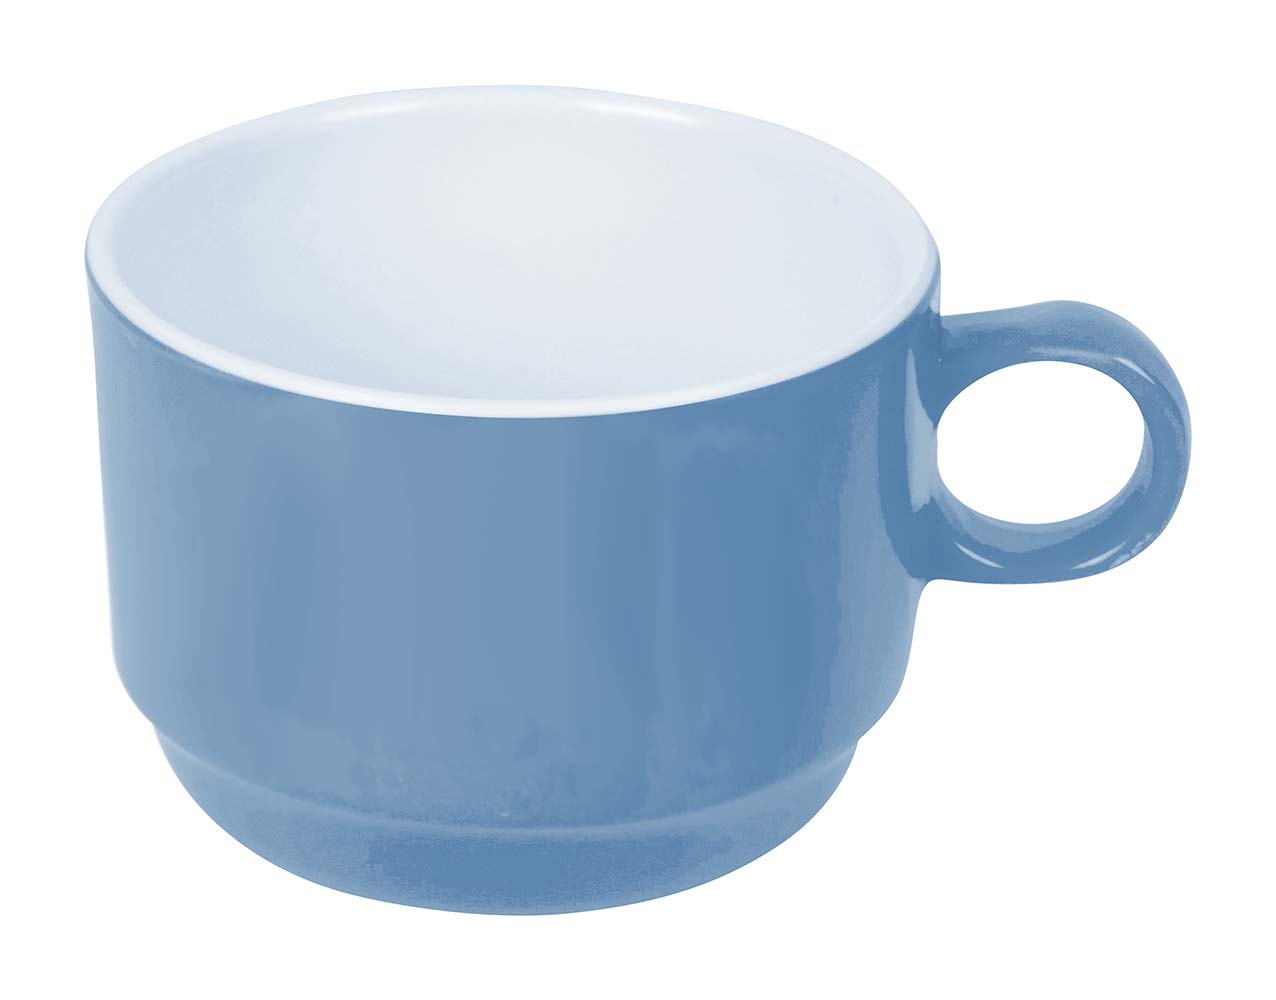 6181288 A cup of 100% melamine. This high quality melamine cup is virtually unbreakable and very lightweight. In addition, the cup is scratch resistant and dishwasher safe. Can be combined with dish 6181289.